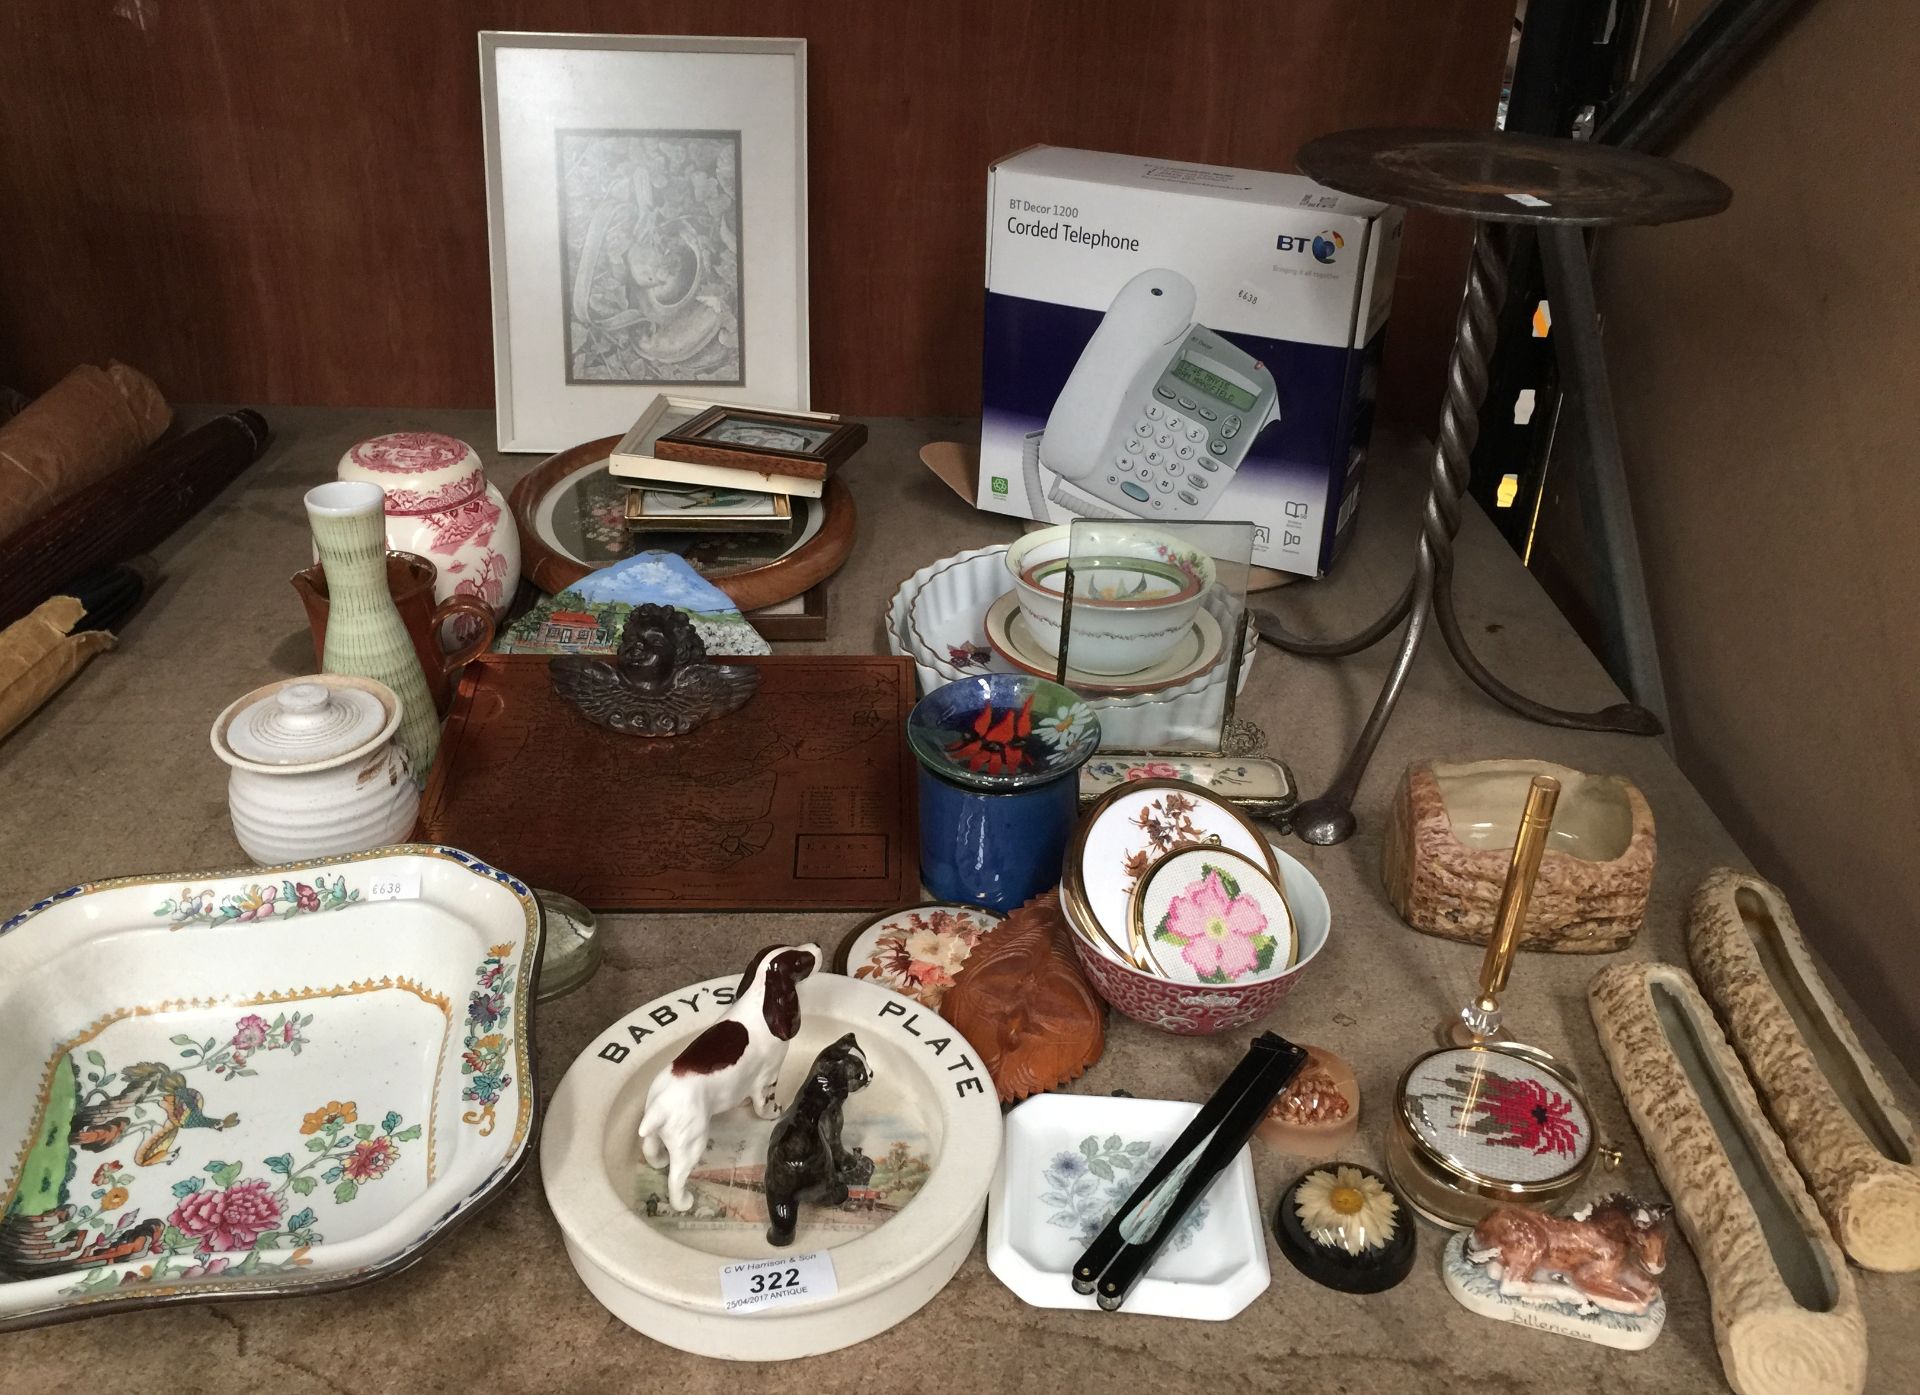 Contents to part of rack - assorted ceramic ornaments, small wool work tapestries, BT telephone etc.